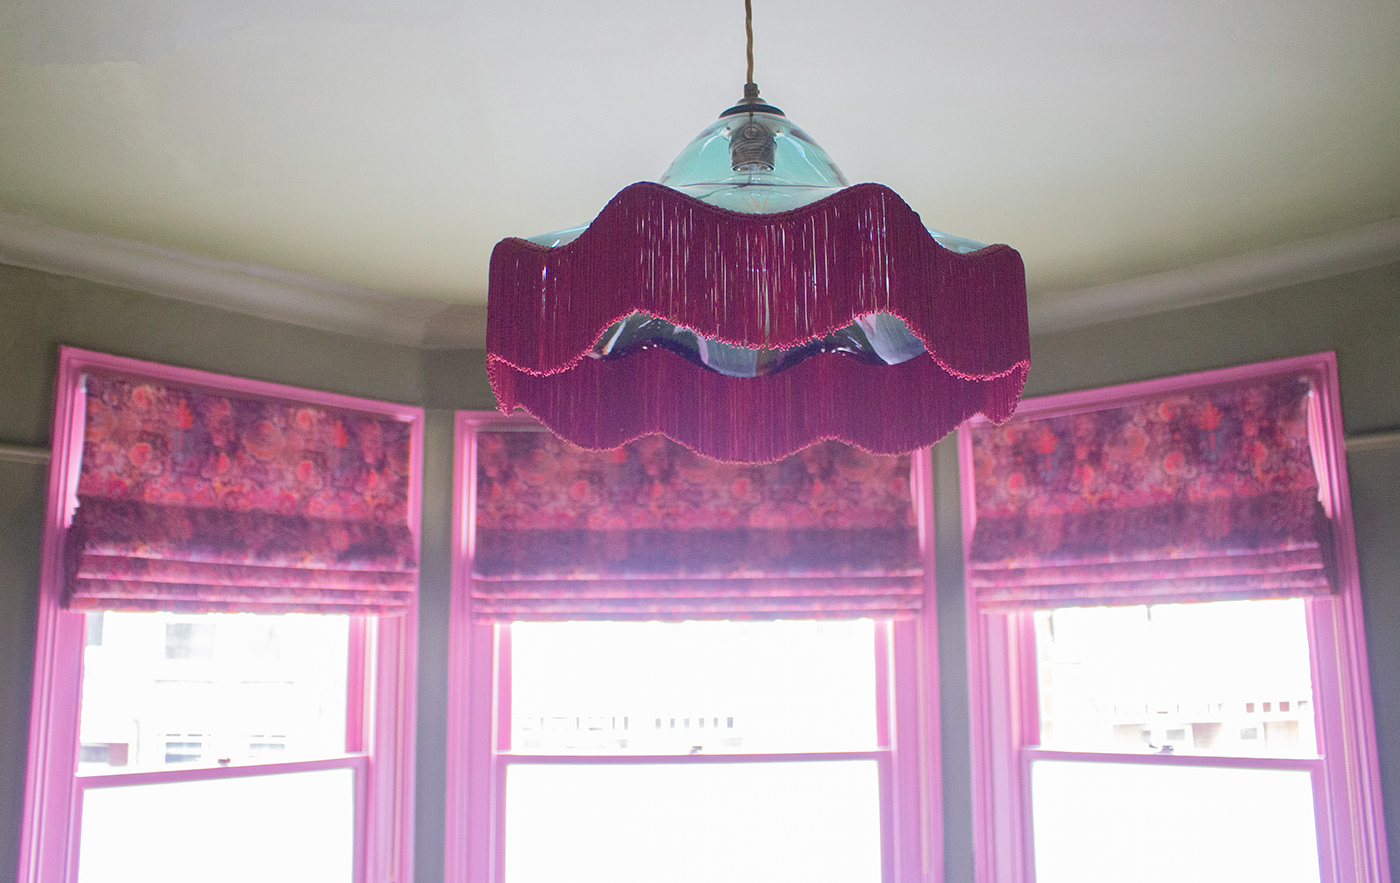 A photo of the Bancha Bedroom project showing the ceiling painted the same colour as the walls.